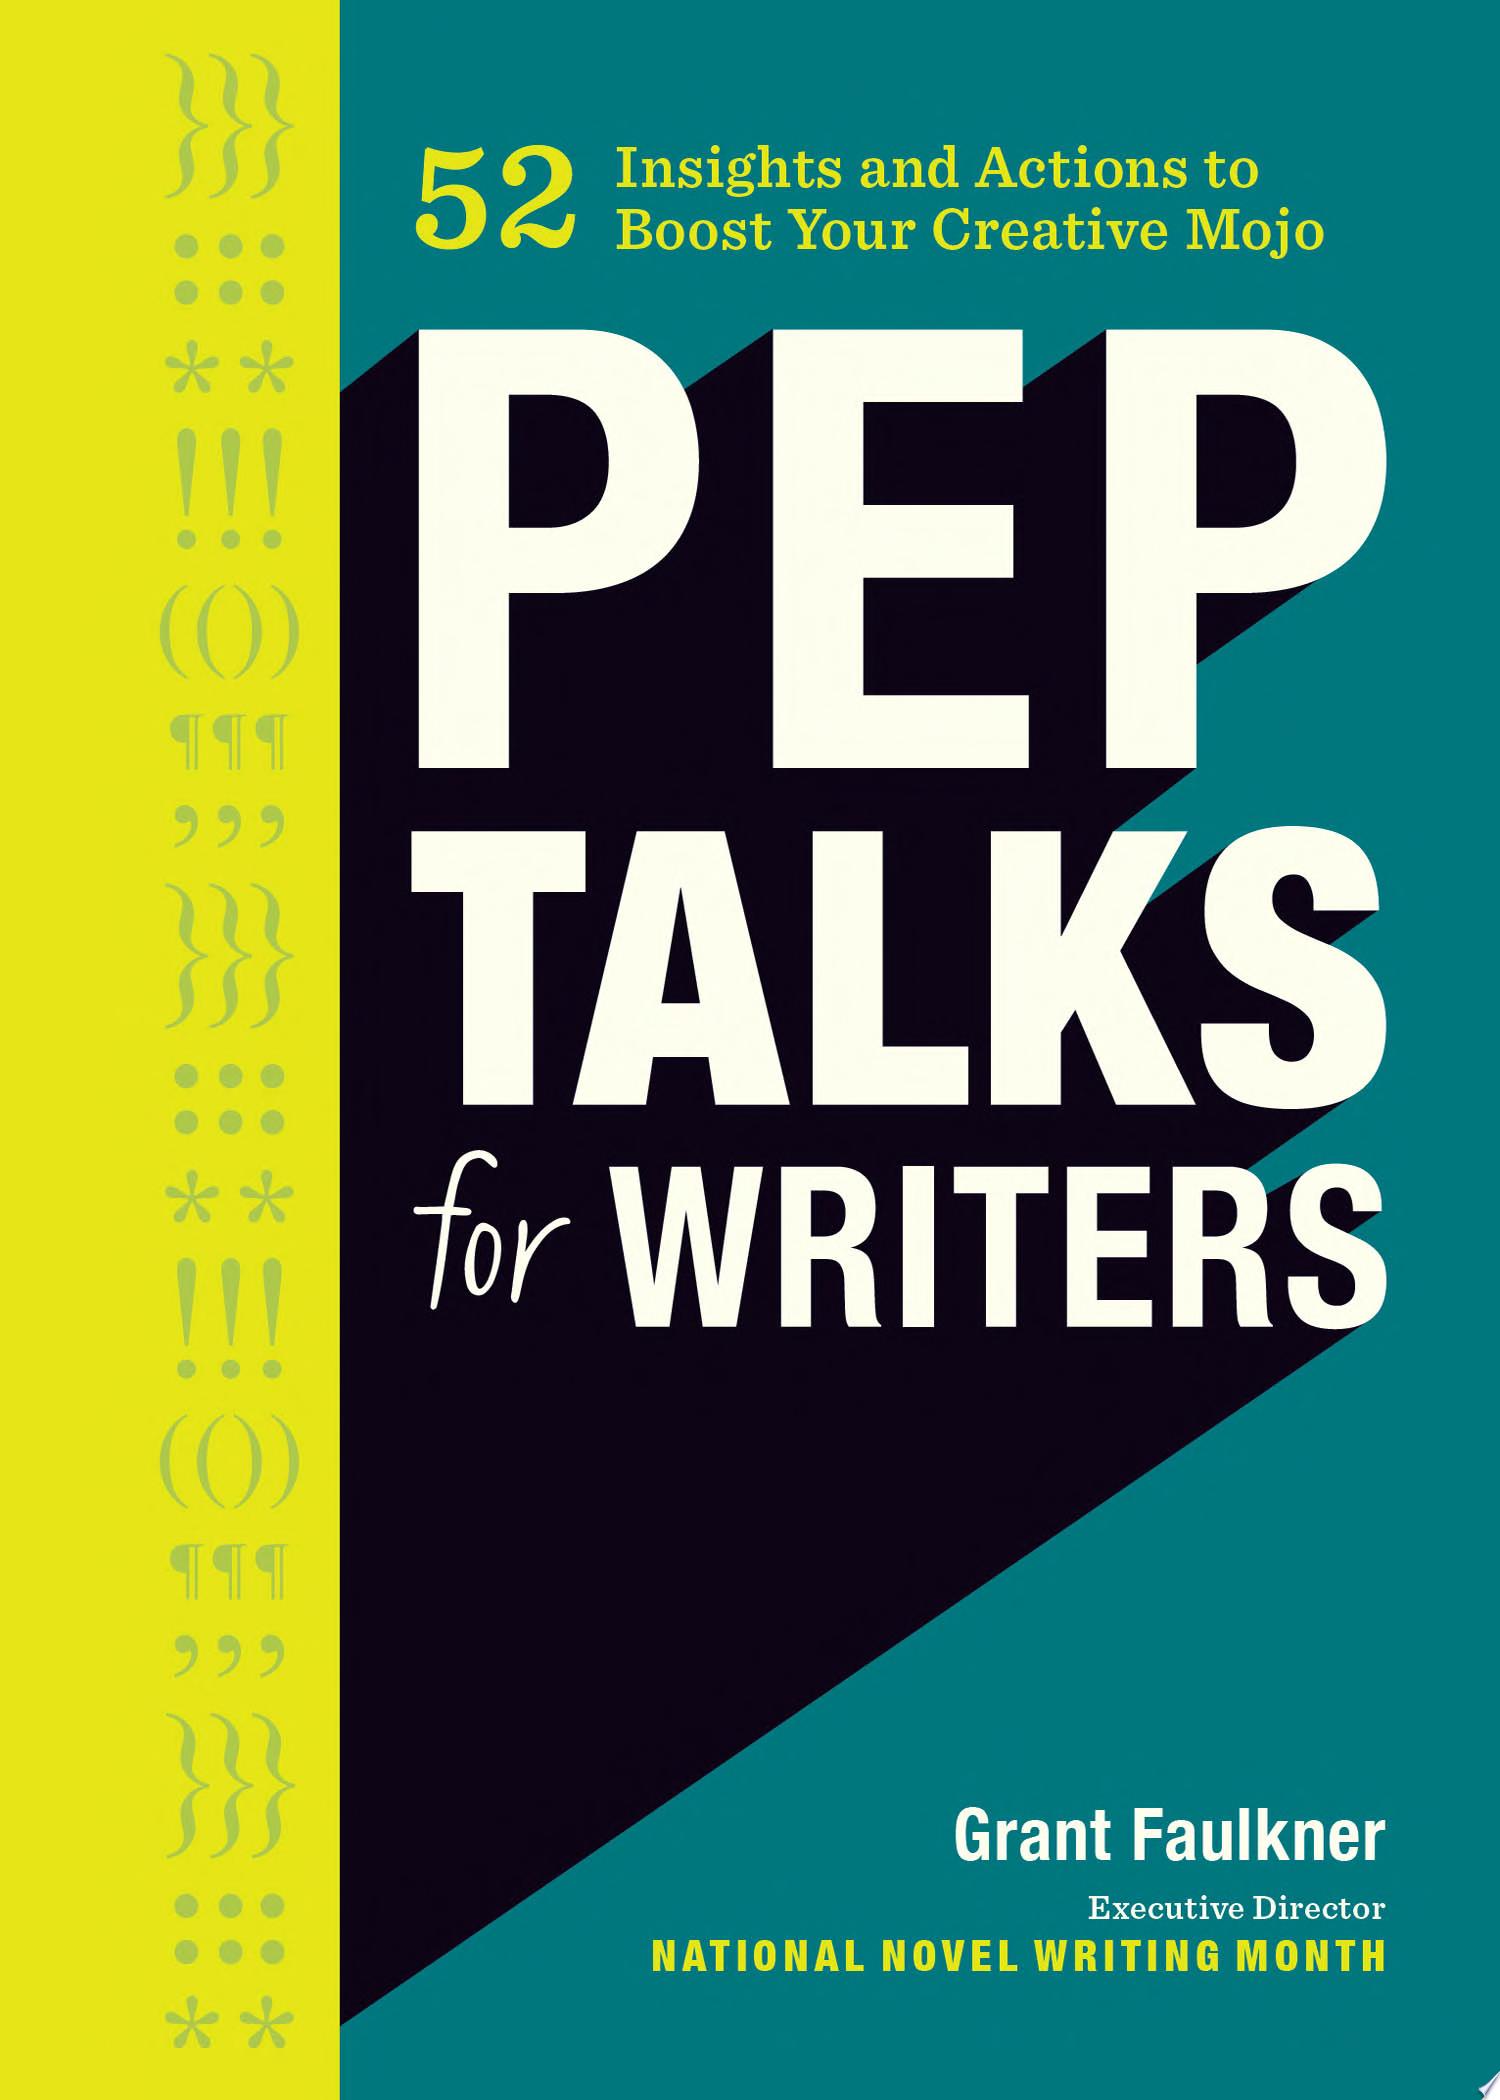 Image for "Pep Talks for Writers"